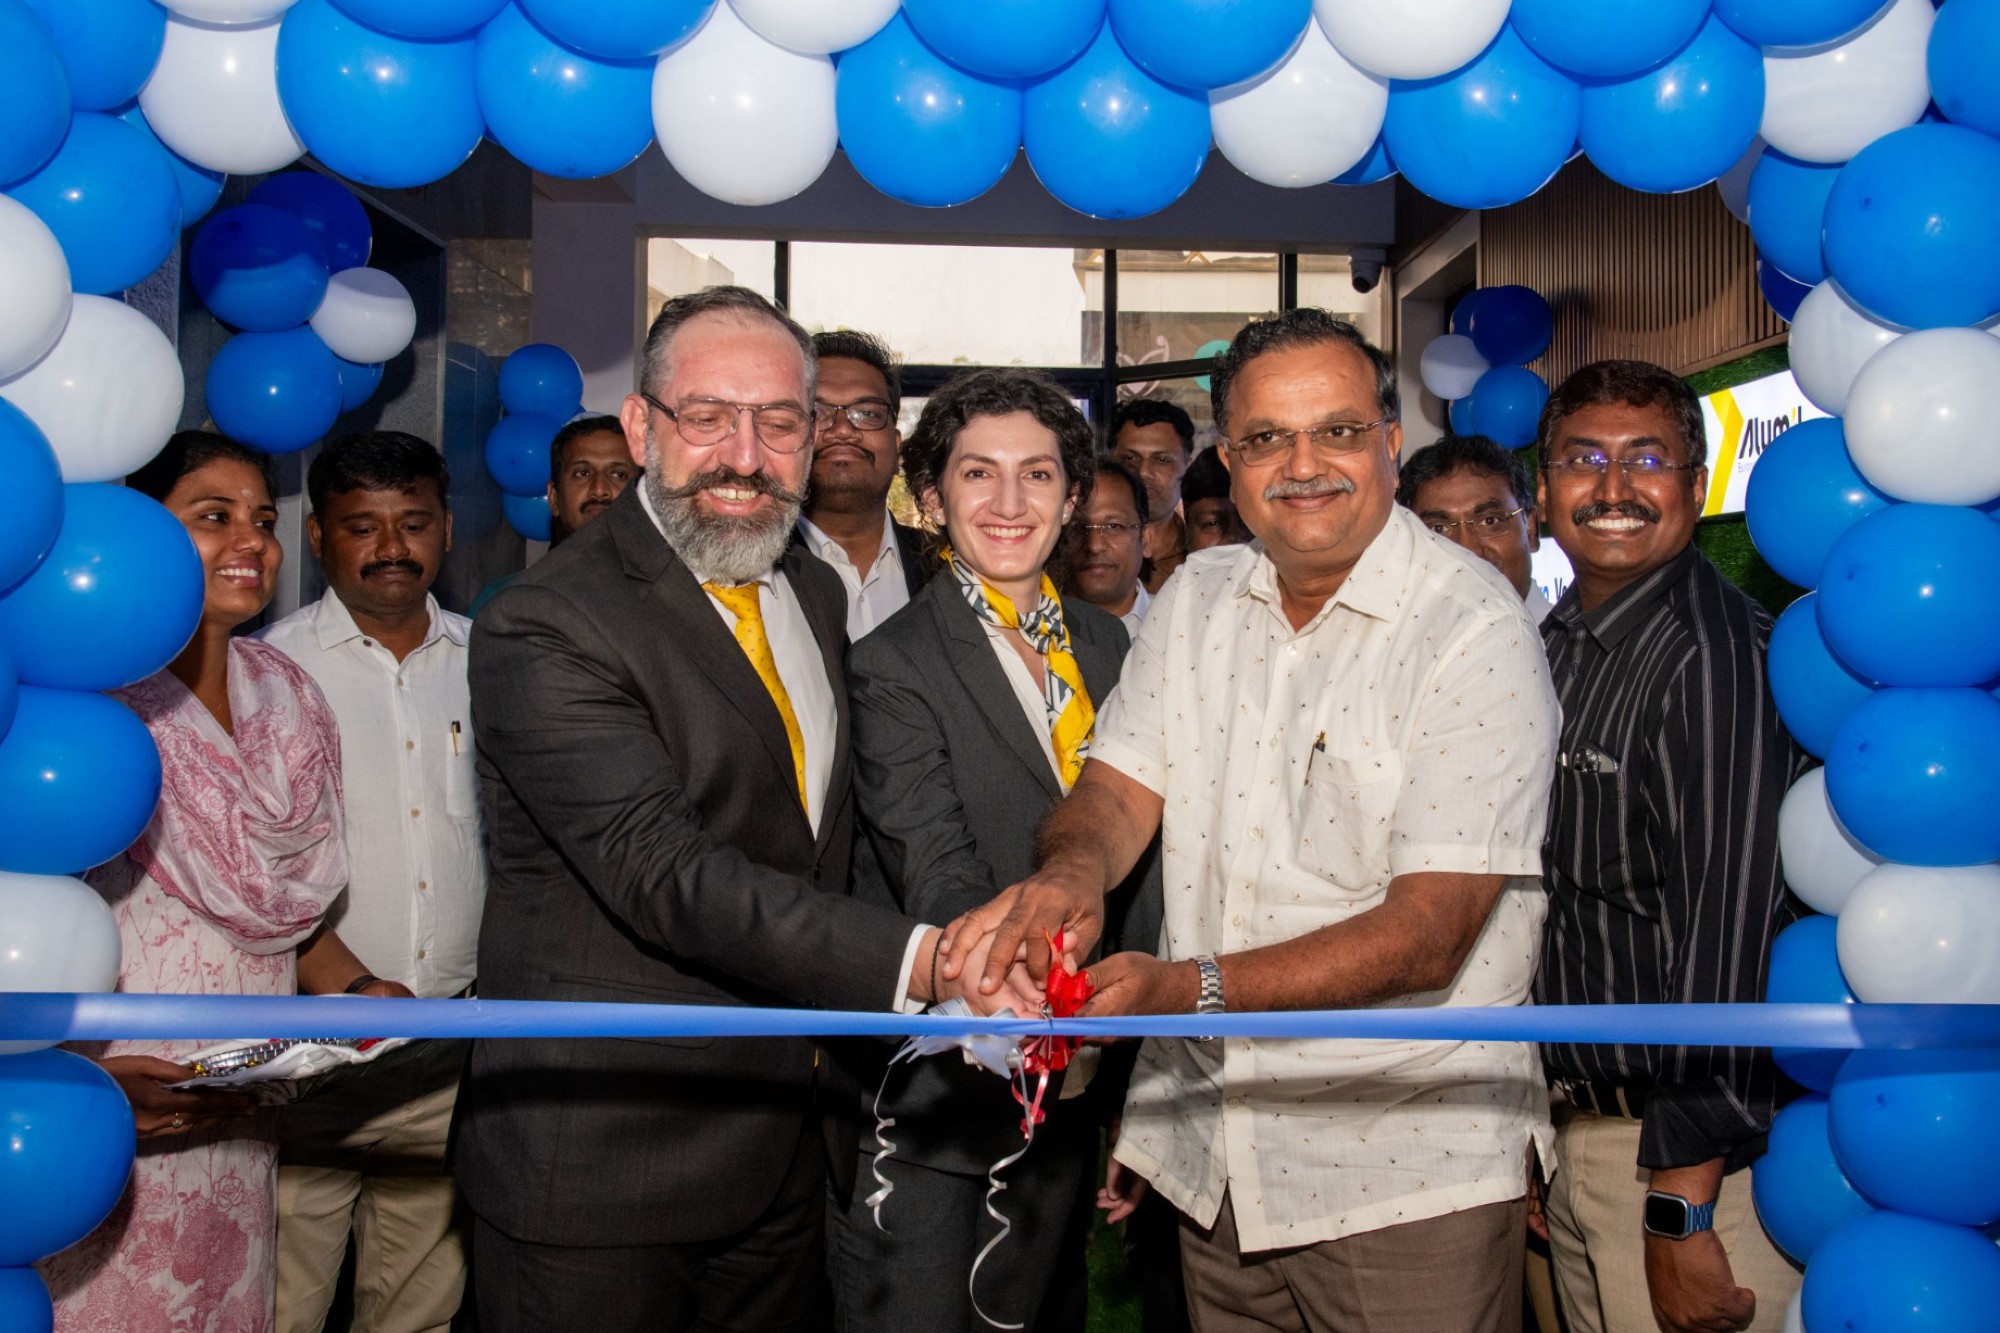 Alumil India expands its presence in Chennai with a new showroom, featuring top-tier architectural aluminum systems for residential and commercial projects